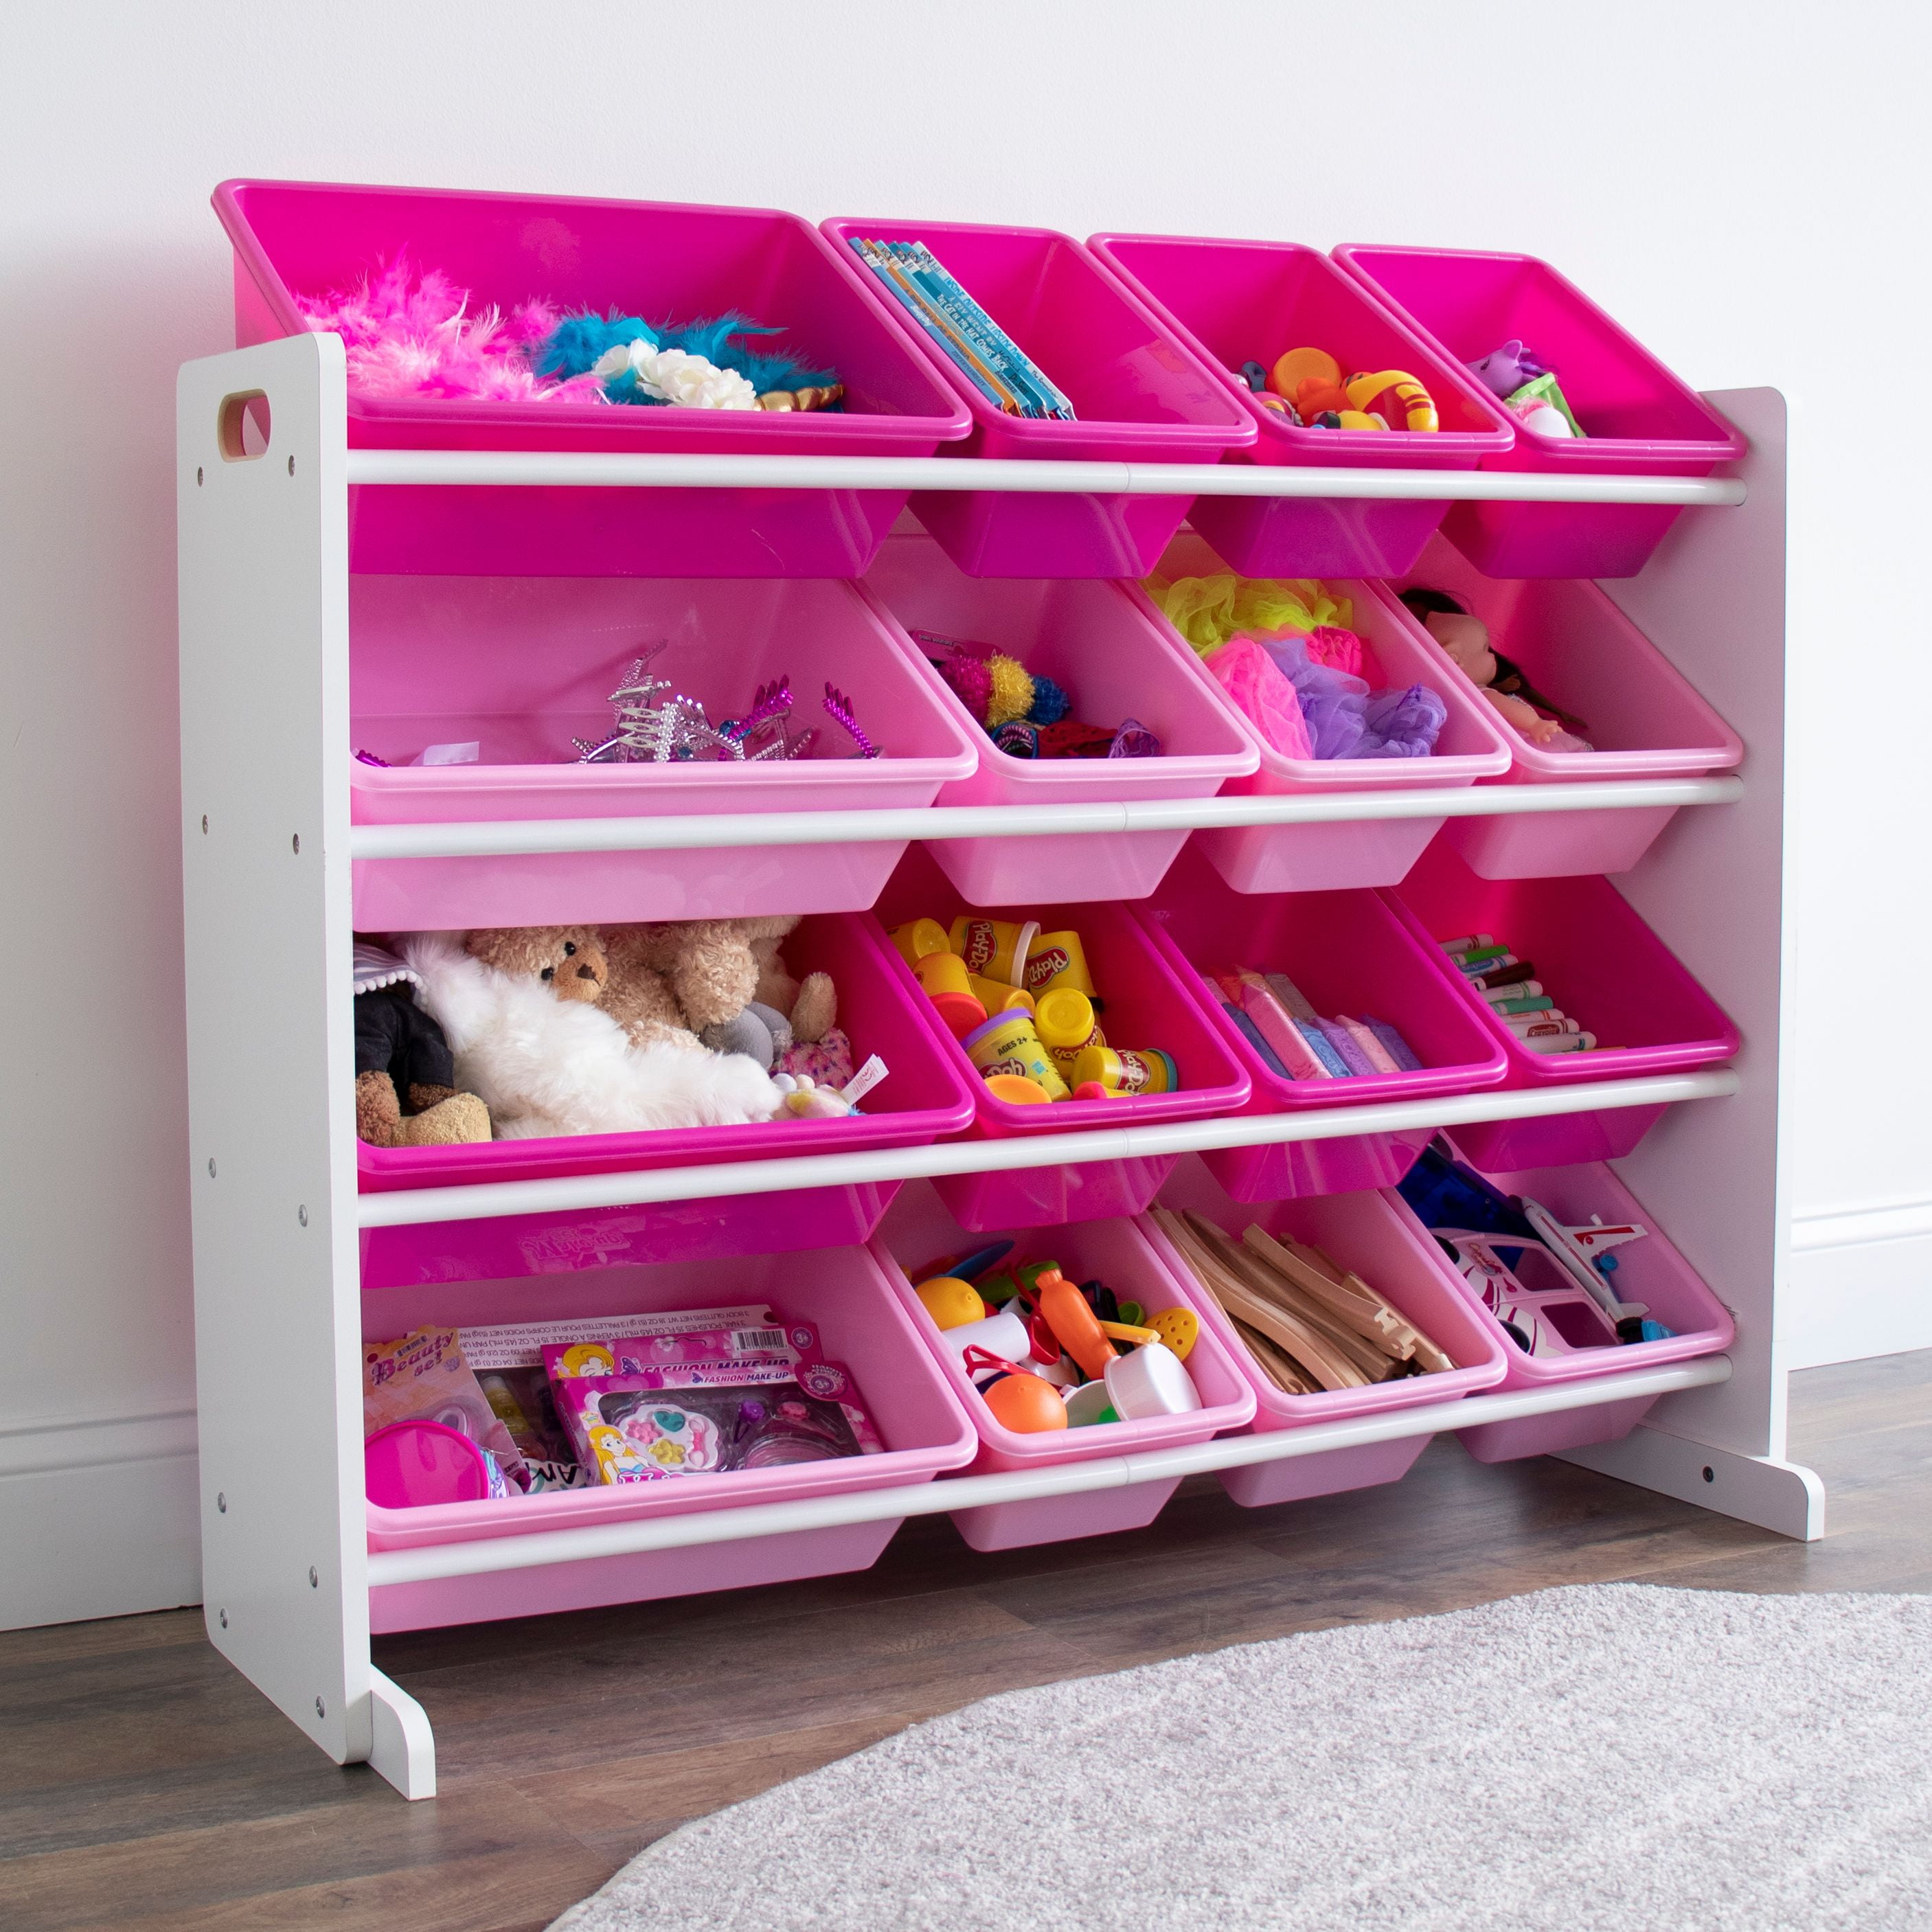 22 Parent-Approved Toy Storage Ideas